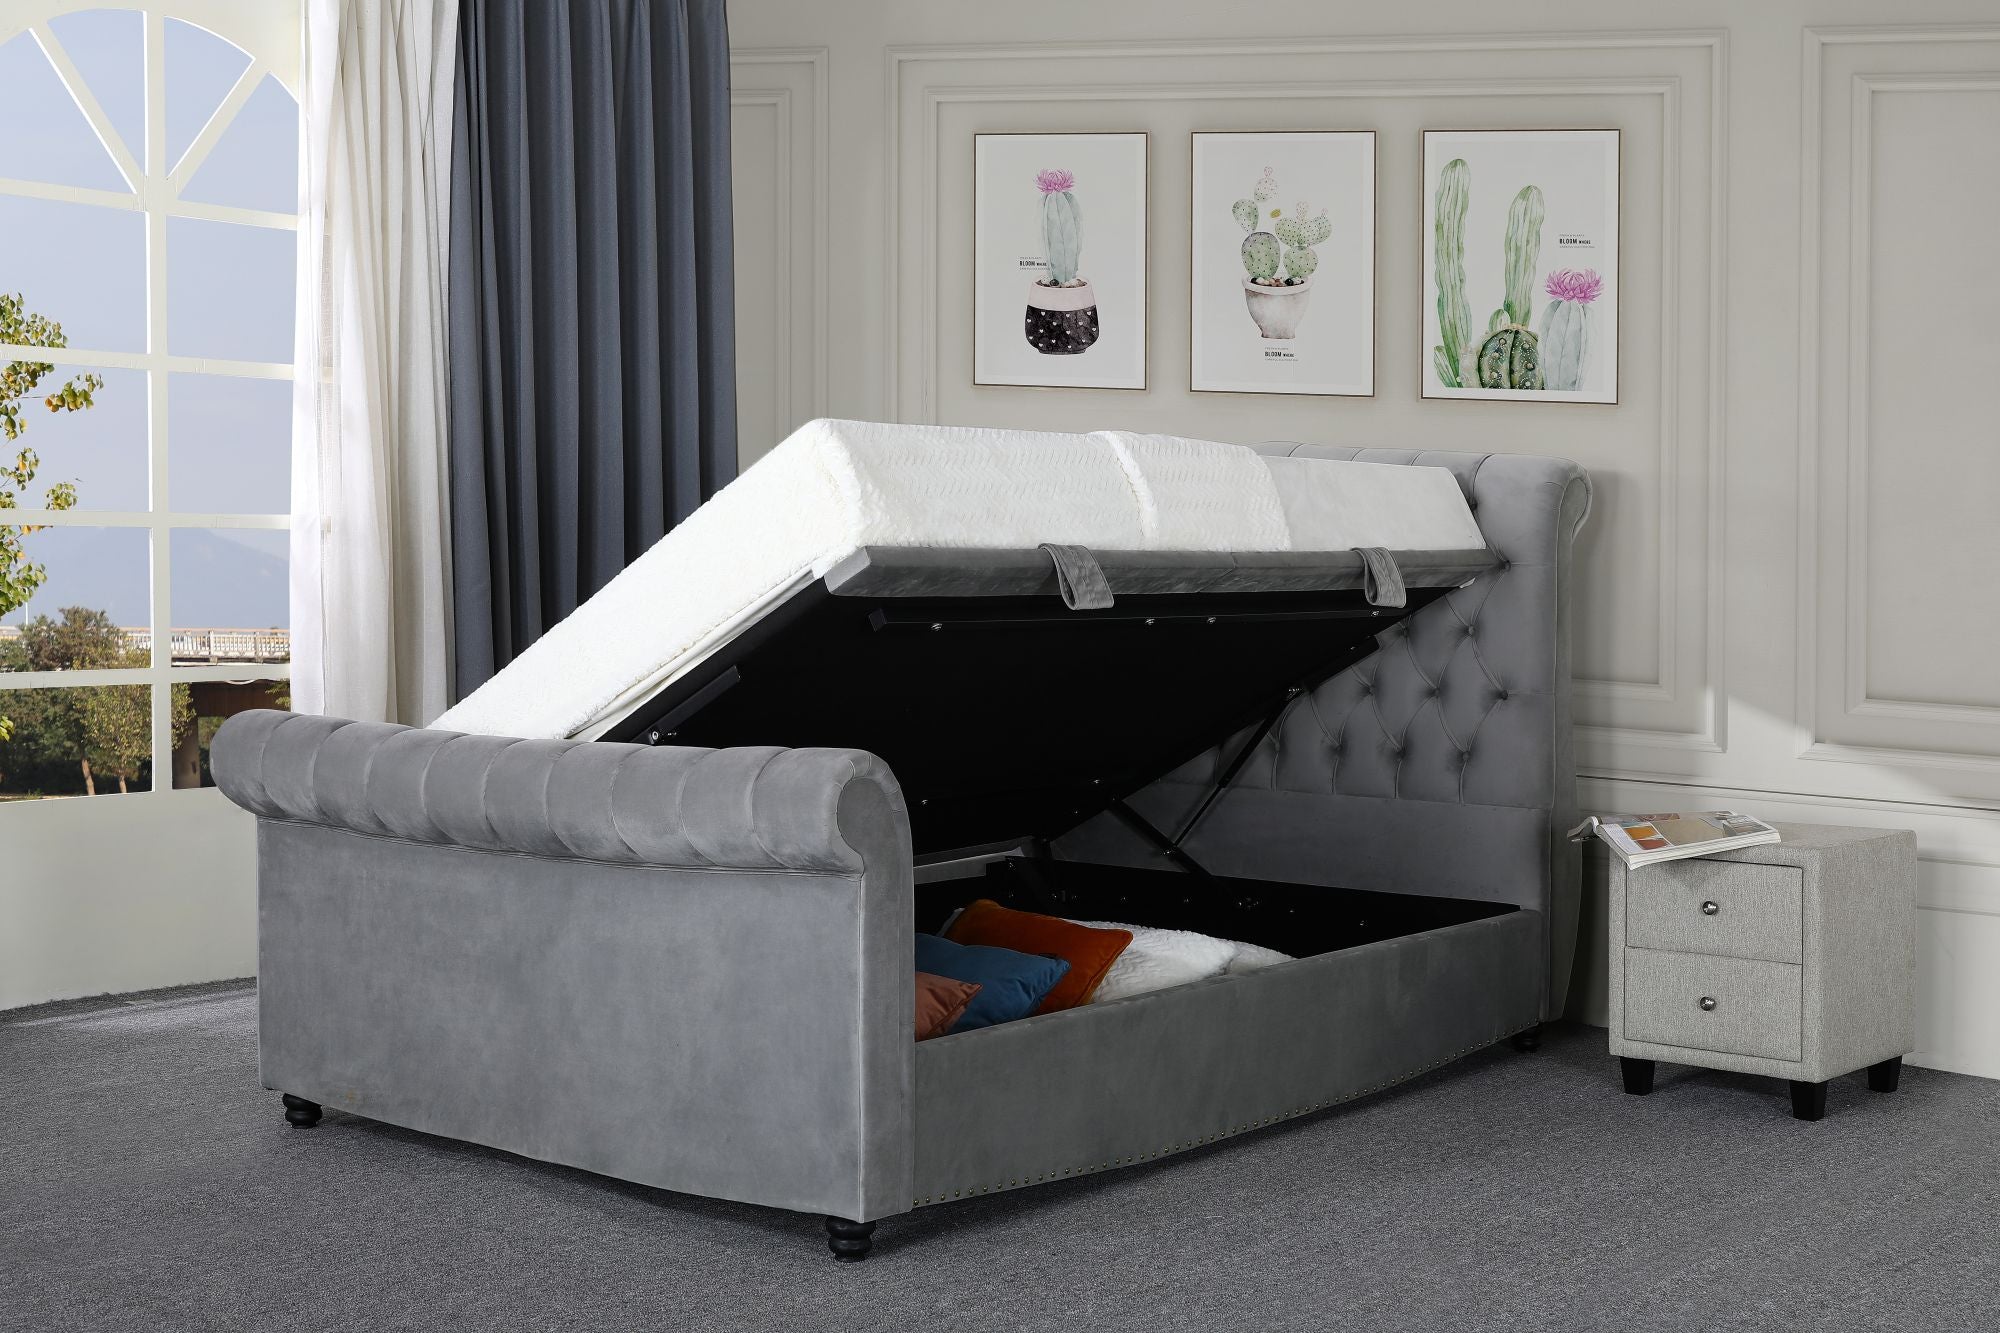 Side opened view of Mayfair Ottoman bedframe